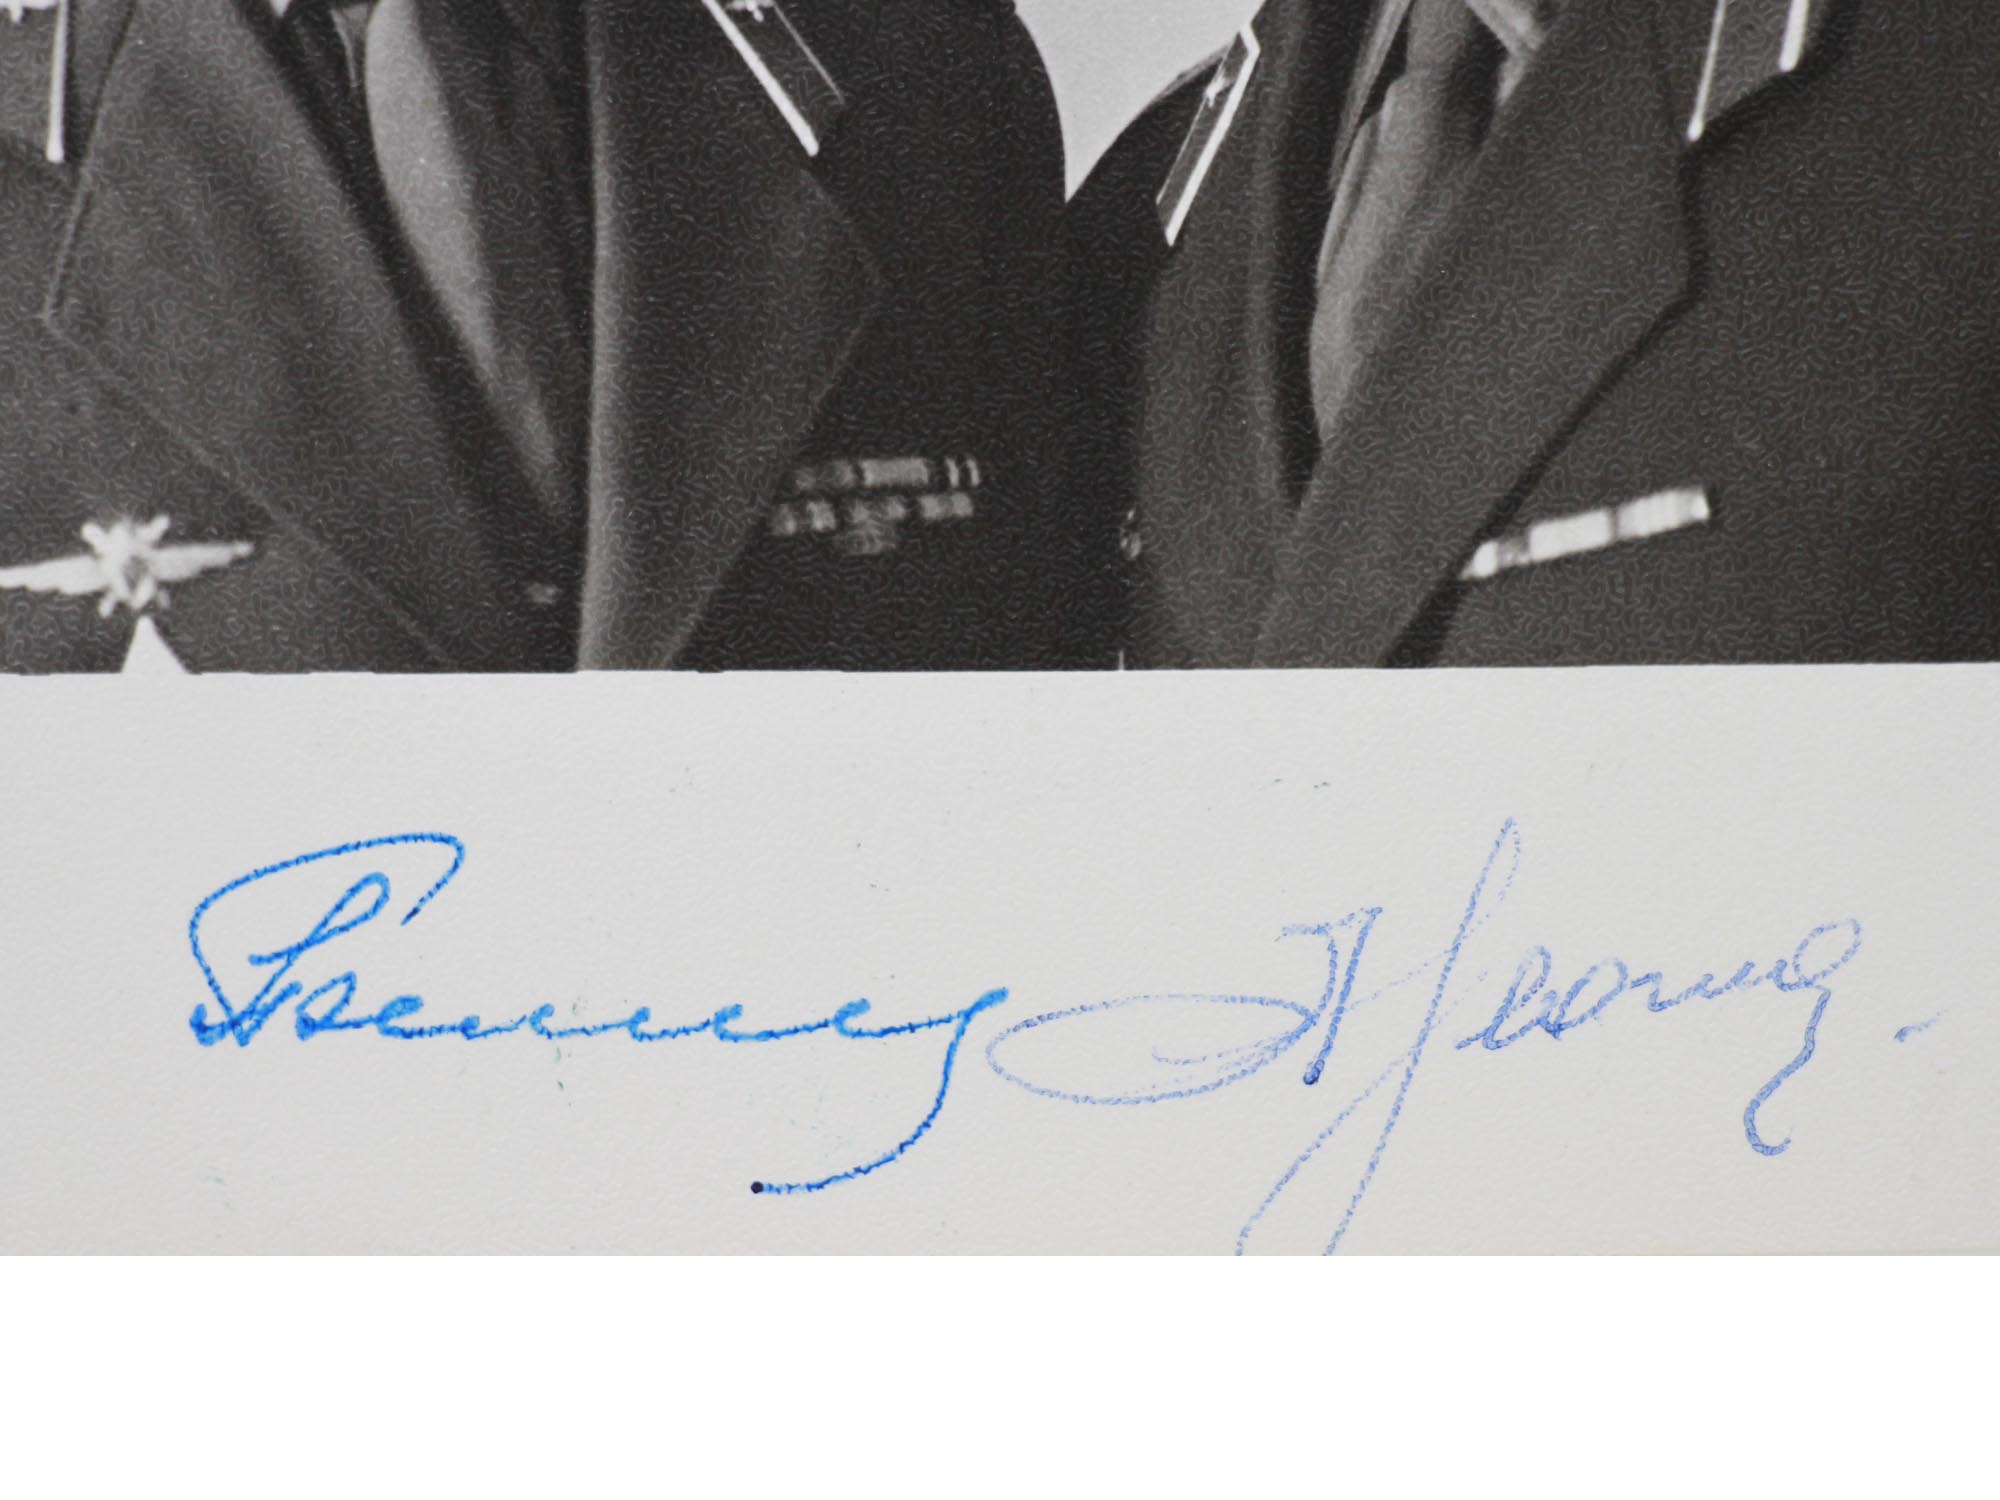 A SIGNED PHOTOGRAPH OF SOVIET COSMONAUTS PIC-2